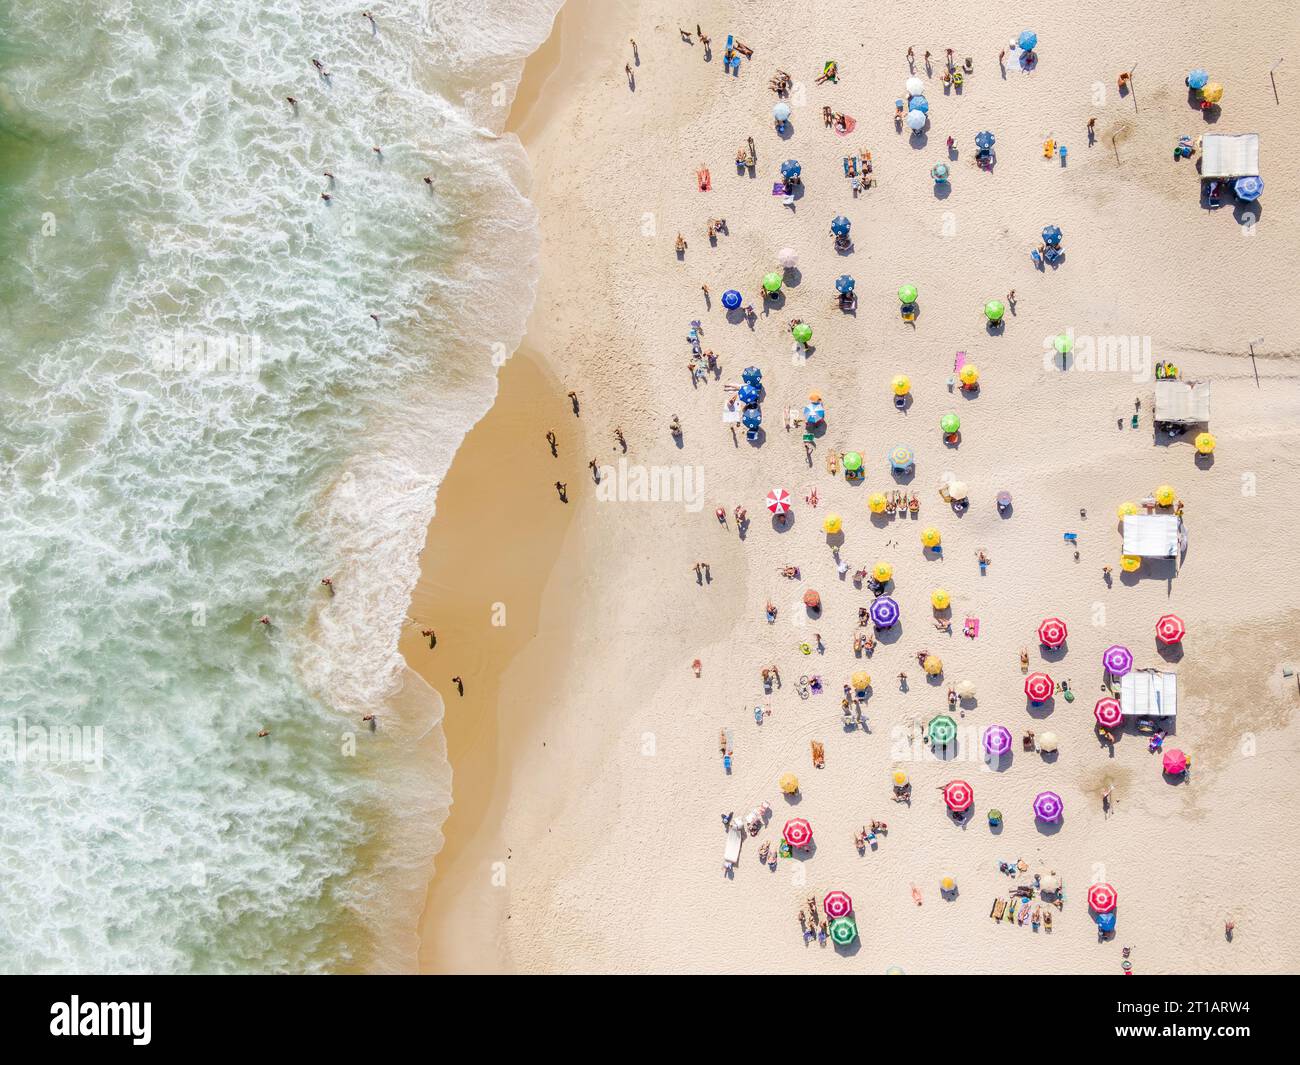 Top down aerial view of people relaxing and enjoying summer at Ipanema Beach in Rio de Janeiro, Brazil. Stock Photo